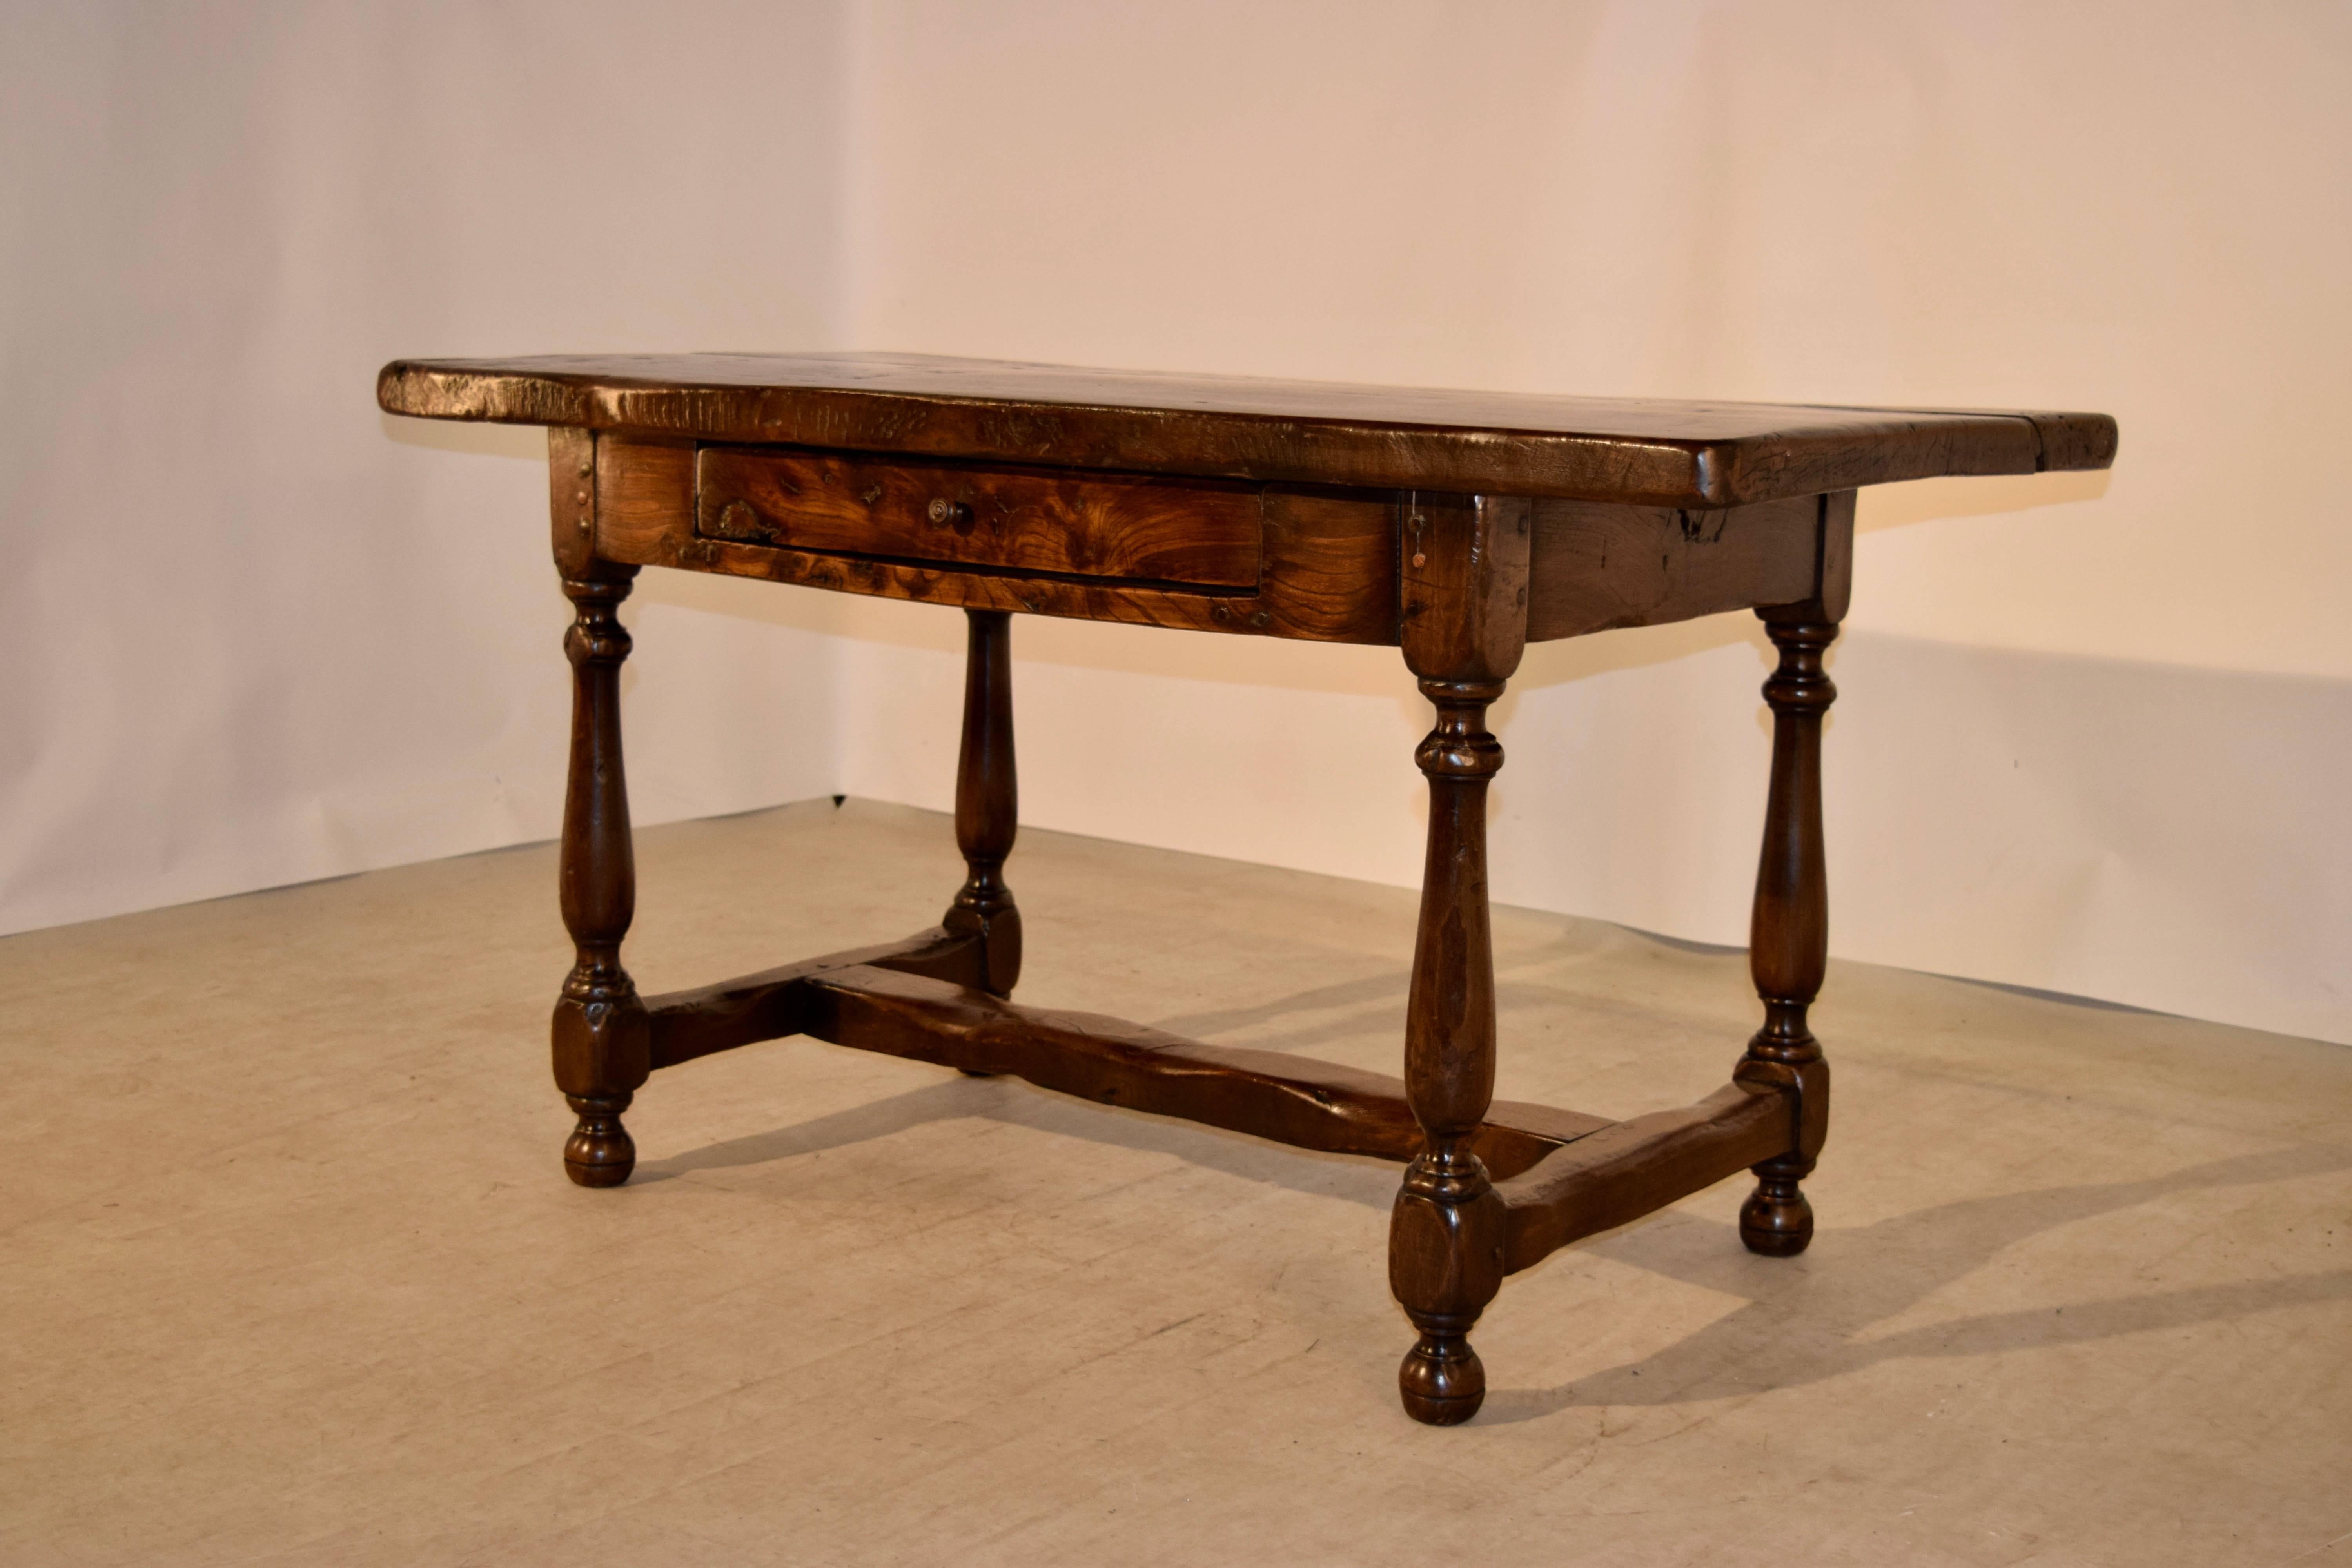 19th century elm table from England. The tabletop is one enormous single plank, which has normal shrinkage for its age. The base is simple and has pegged construction and a single drawer in the front and the piece is supported on hand-turned legs,